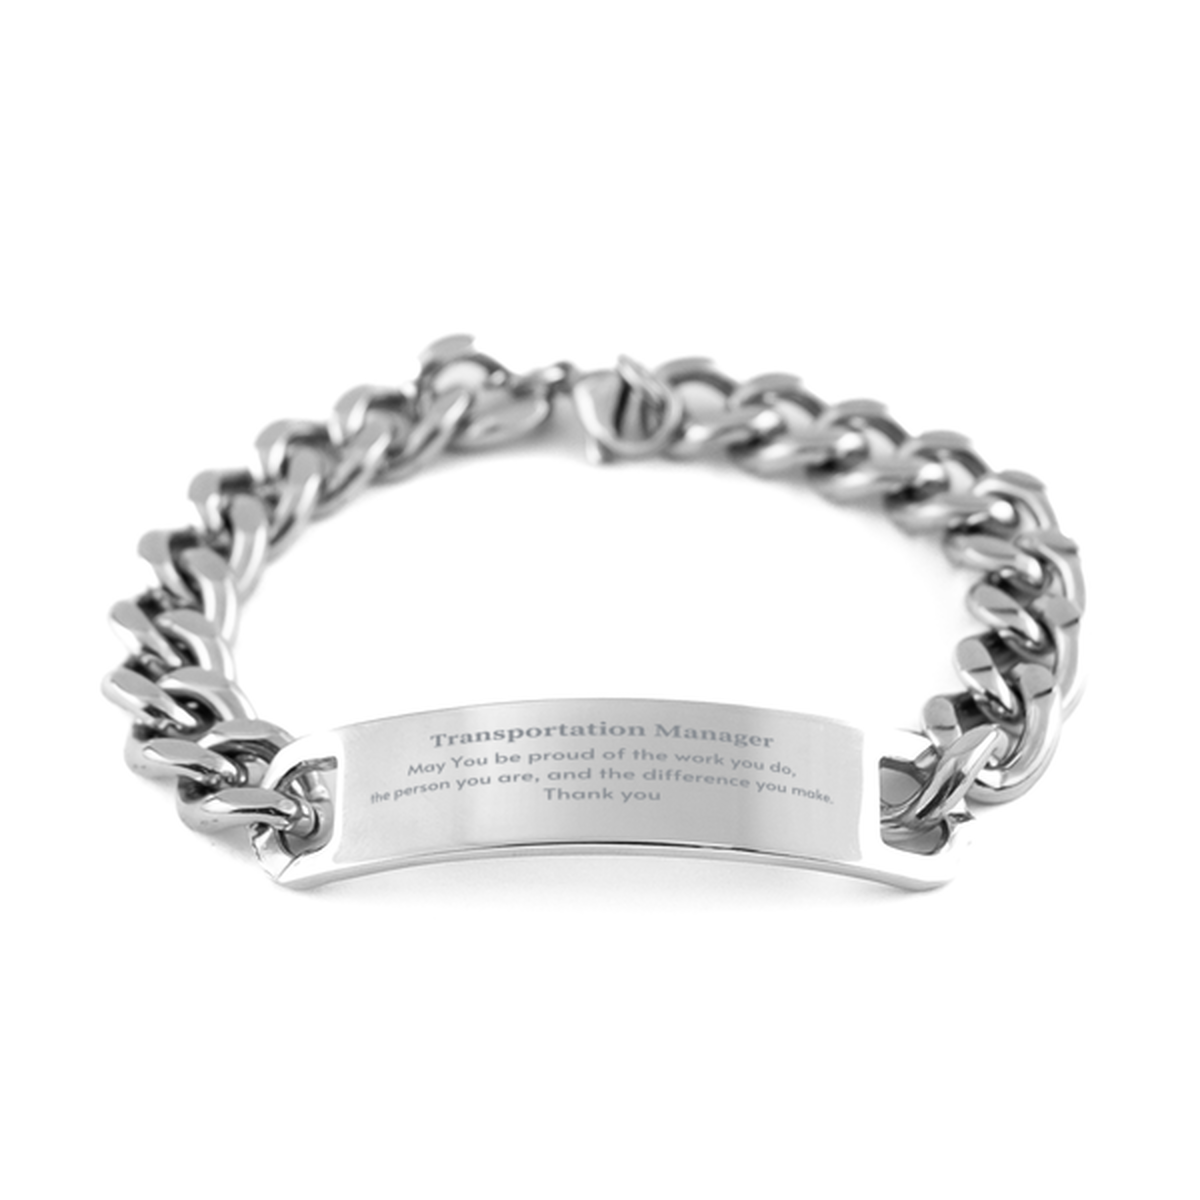 Heartwarming Cuban Chain Stainless Steel Bracelet Retirement Coworkers Gifts for Transportation Manager, Transportation Manager May You be proud of the work you do, the person you are Gifts for Boss Men Women Friends